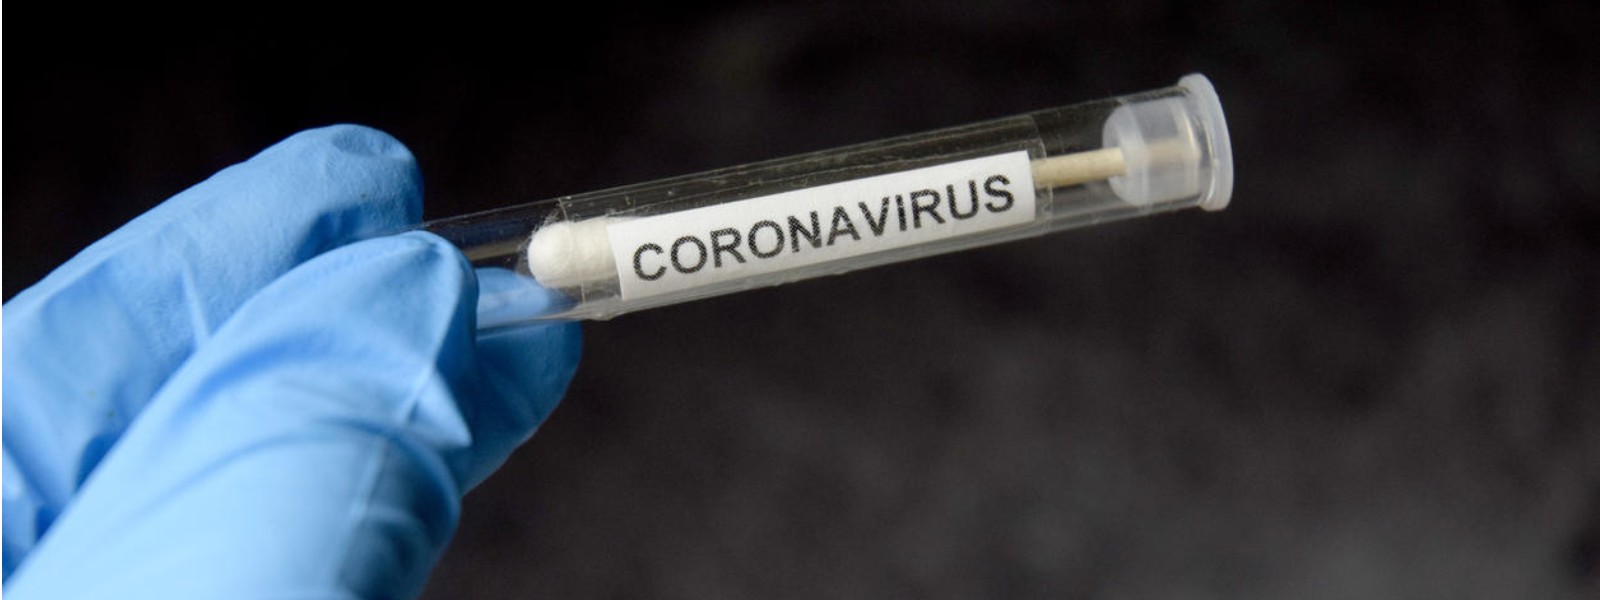 Another Covid vaccine breakthrough; Moderna reveals product is 94.5% effective